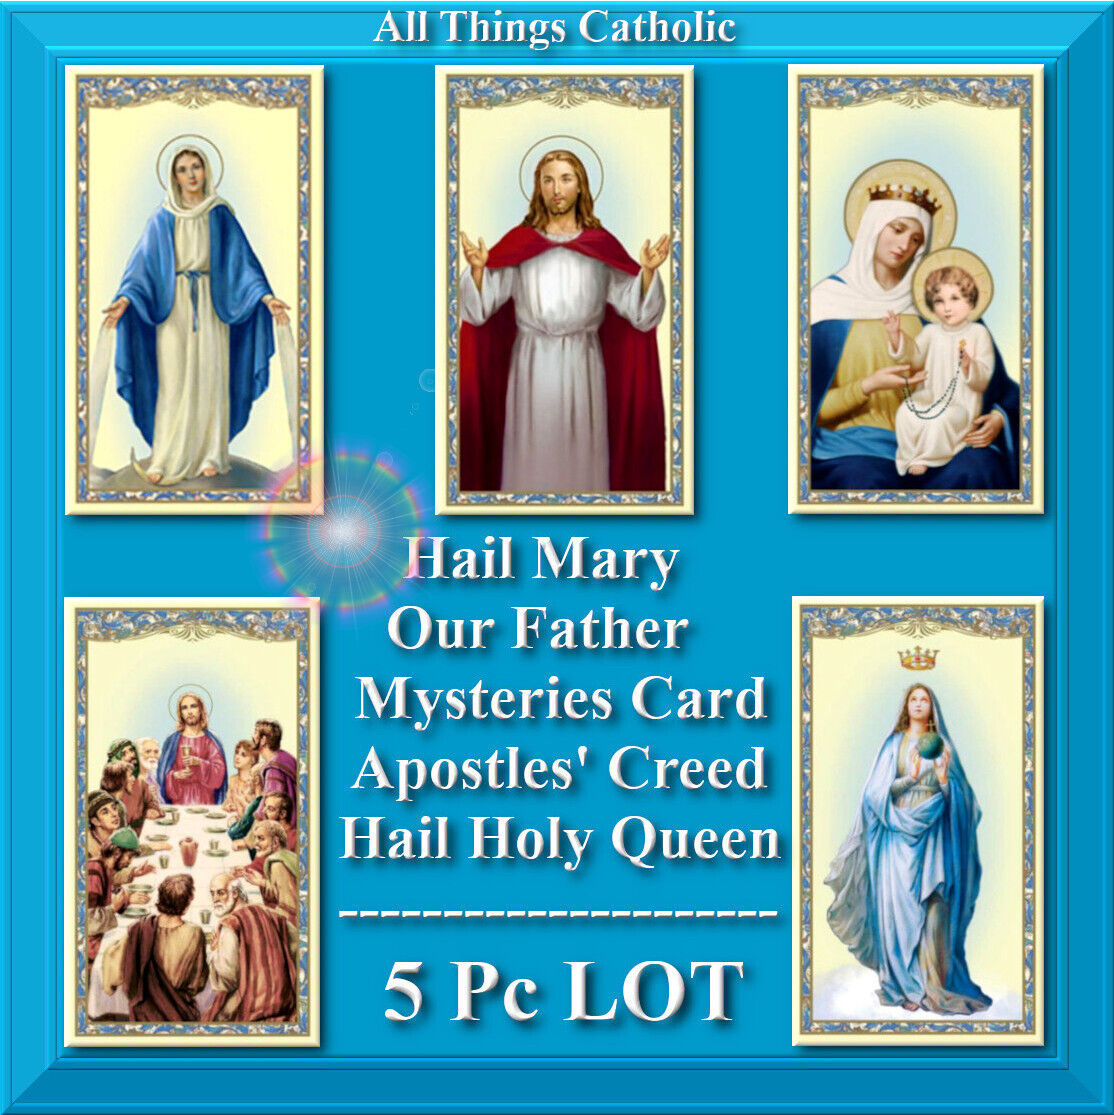 Prayer Card 5 pcs Lot for Saying Rosary Our Father Hail Mary Apostles' Creed set Без бренда